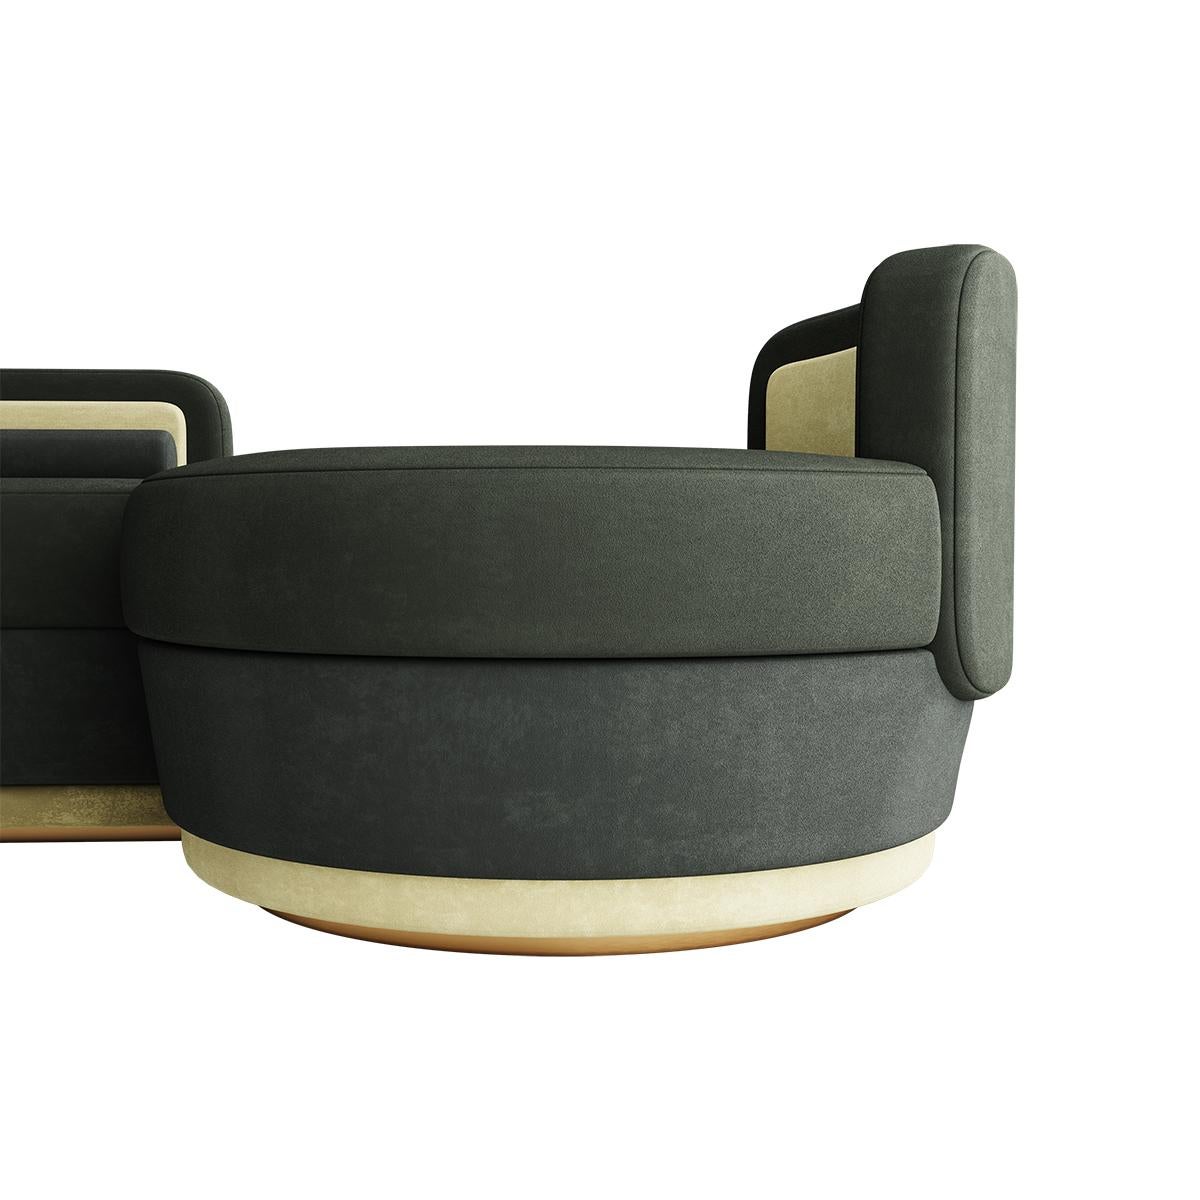 Mid-Century Modern Modern Modular Curved Green Sofa with Side Tables and Gold Details For Sale